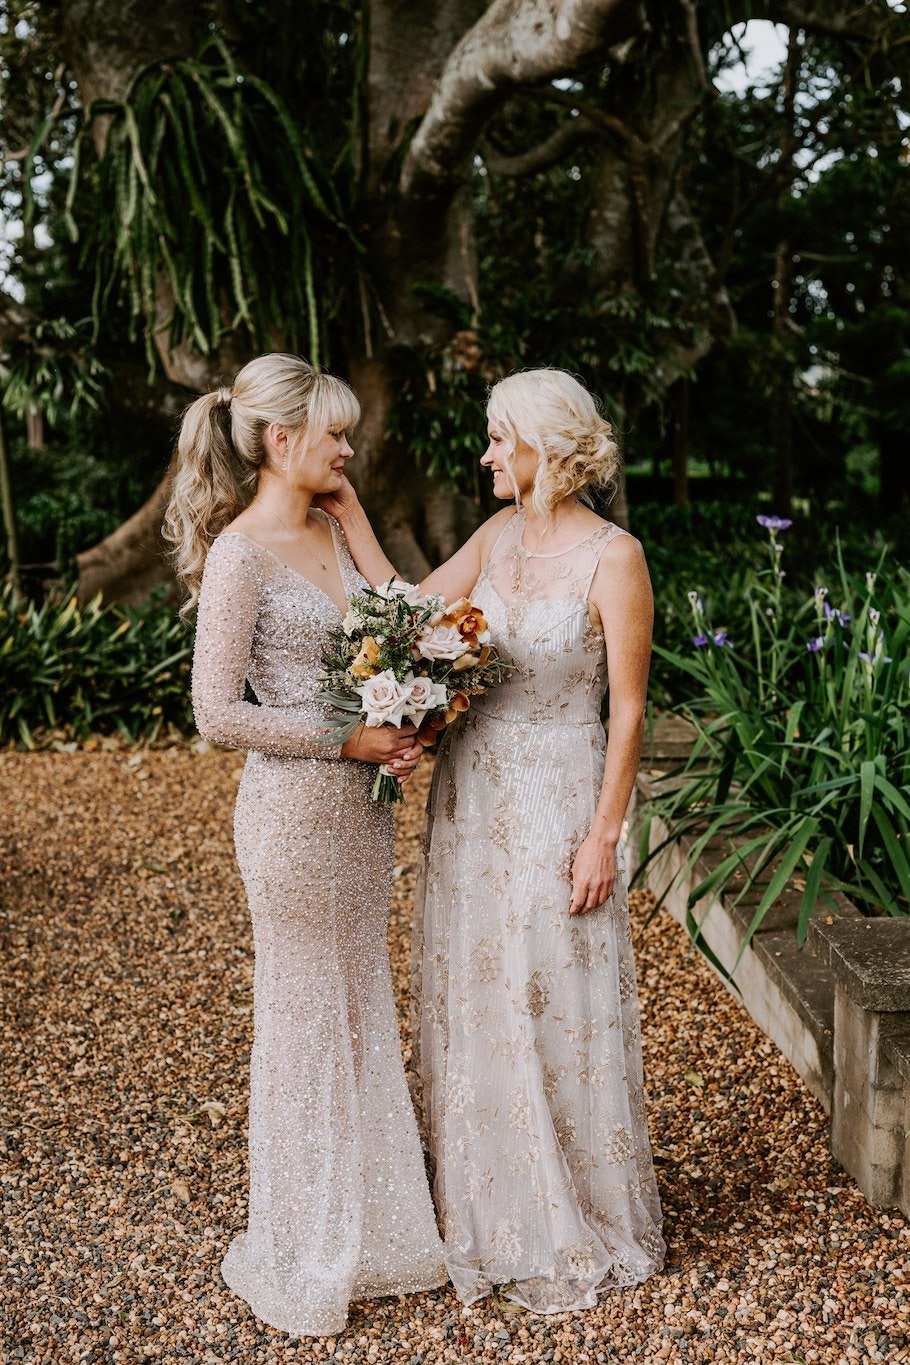 Bride and mother-of-the-bride